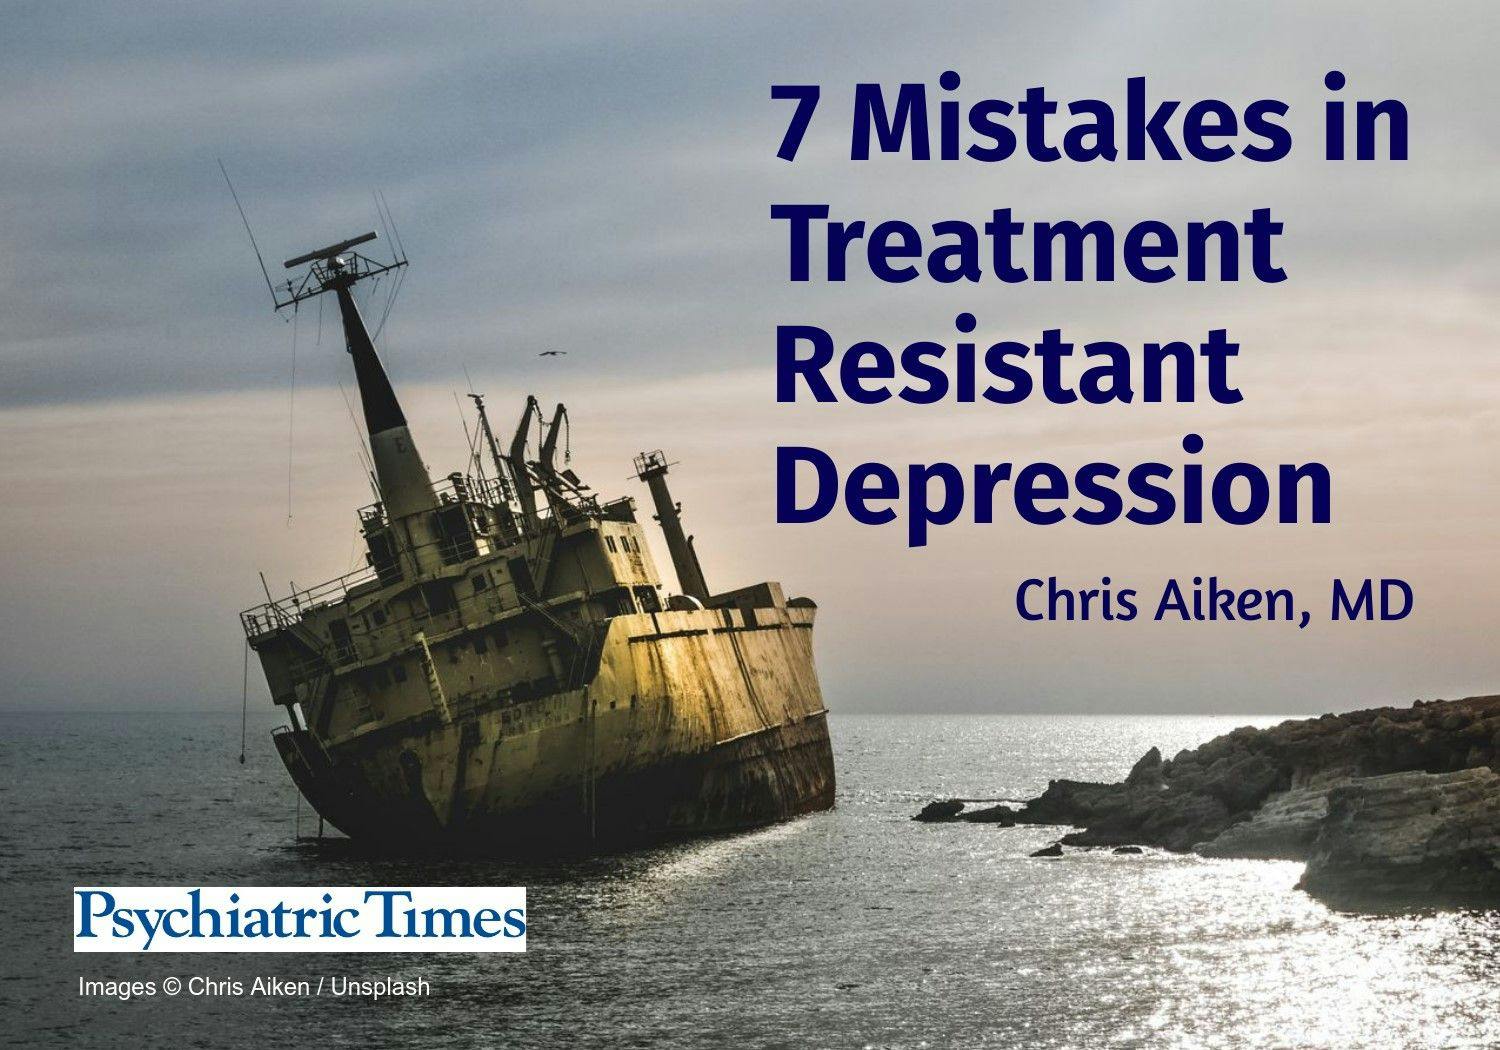 7 Mistakes in Treatment-Resistant Depression